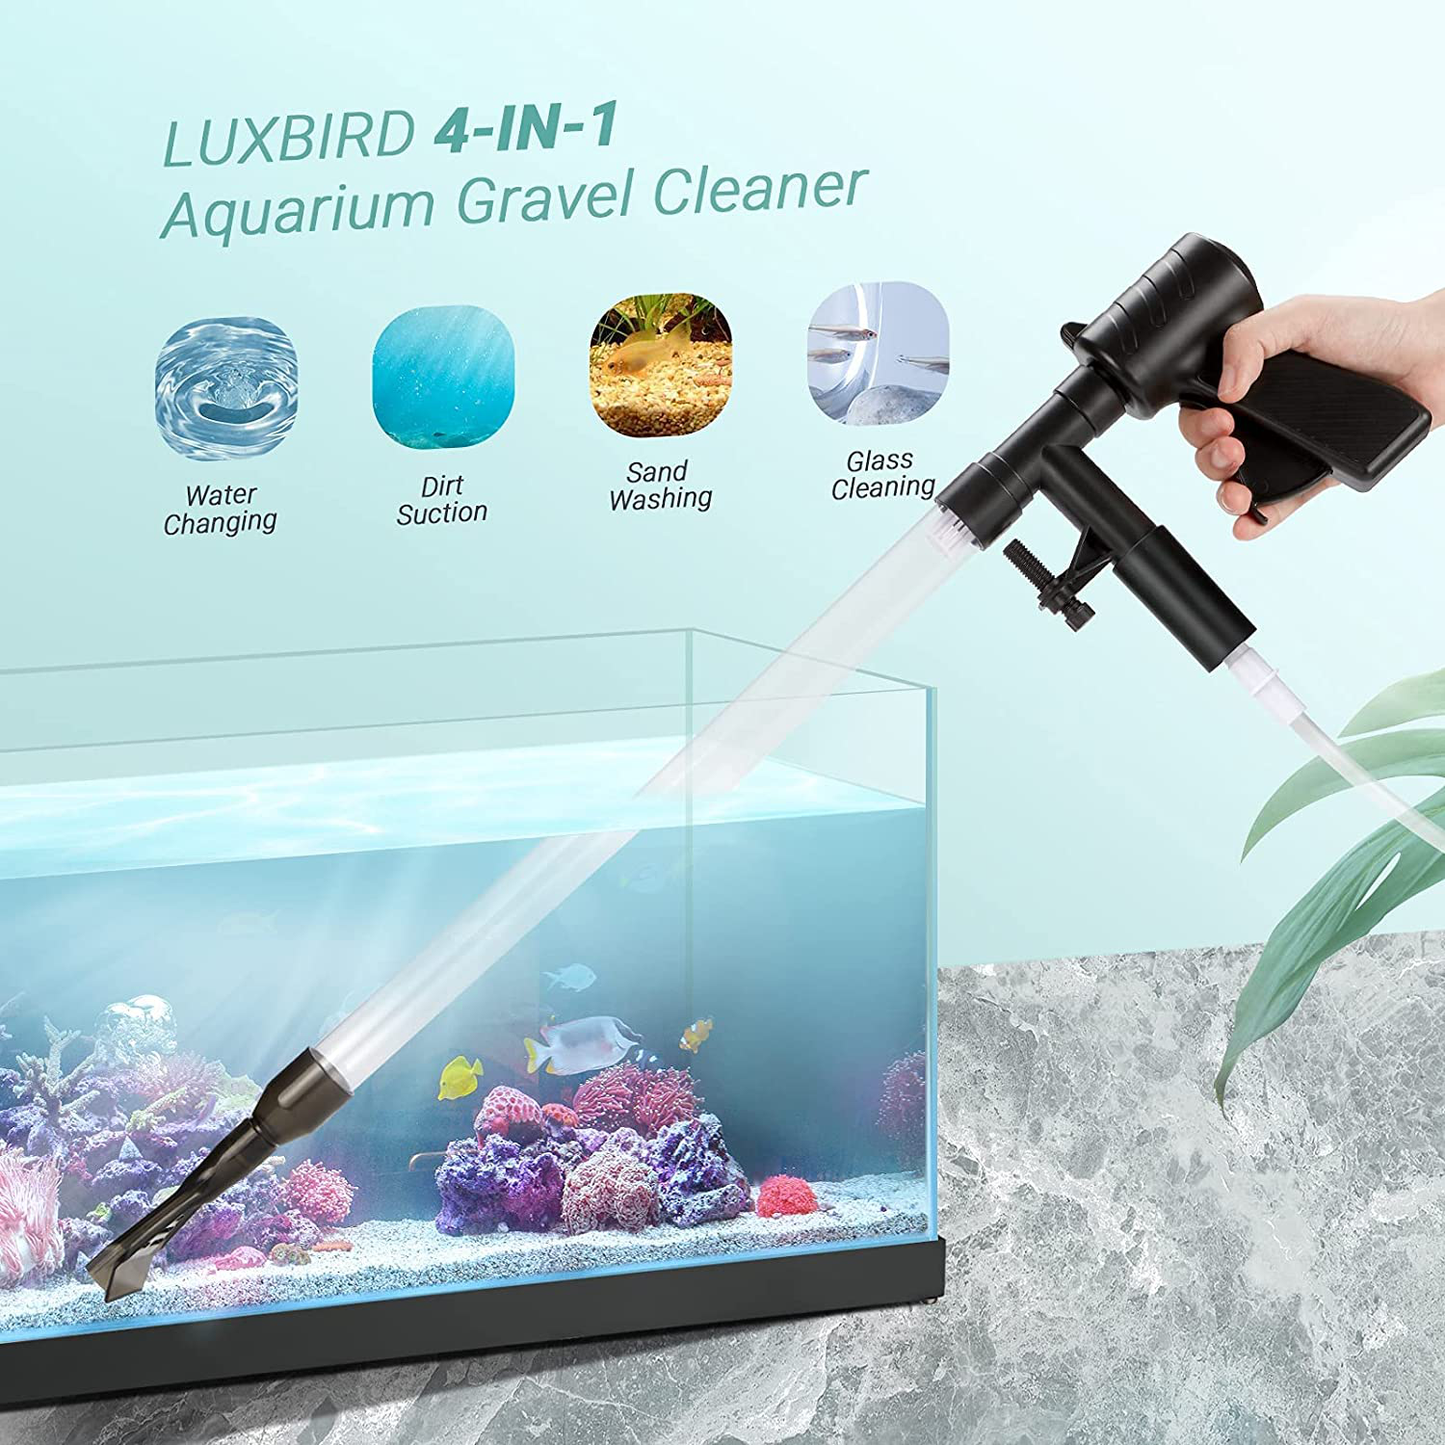 Luxbird Aquarium Gravel Cleaner New Quick Water Changer with Air-Pressure Button Fish Tank Sand Cleaner Kit Long Nozzle Water Hose Controller Clamp for Aquarium Cleaning Gravel and Sand